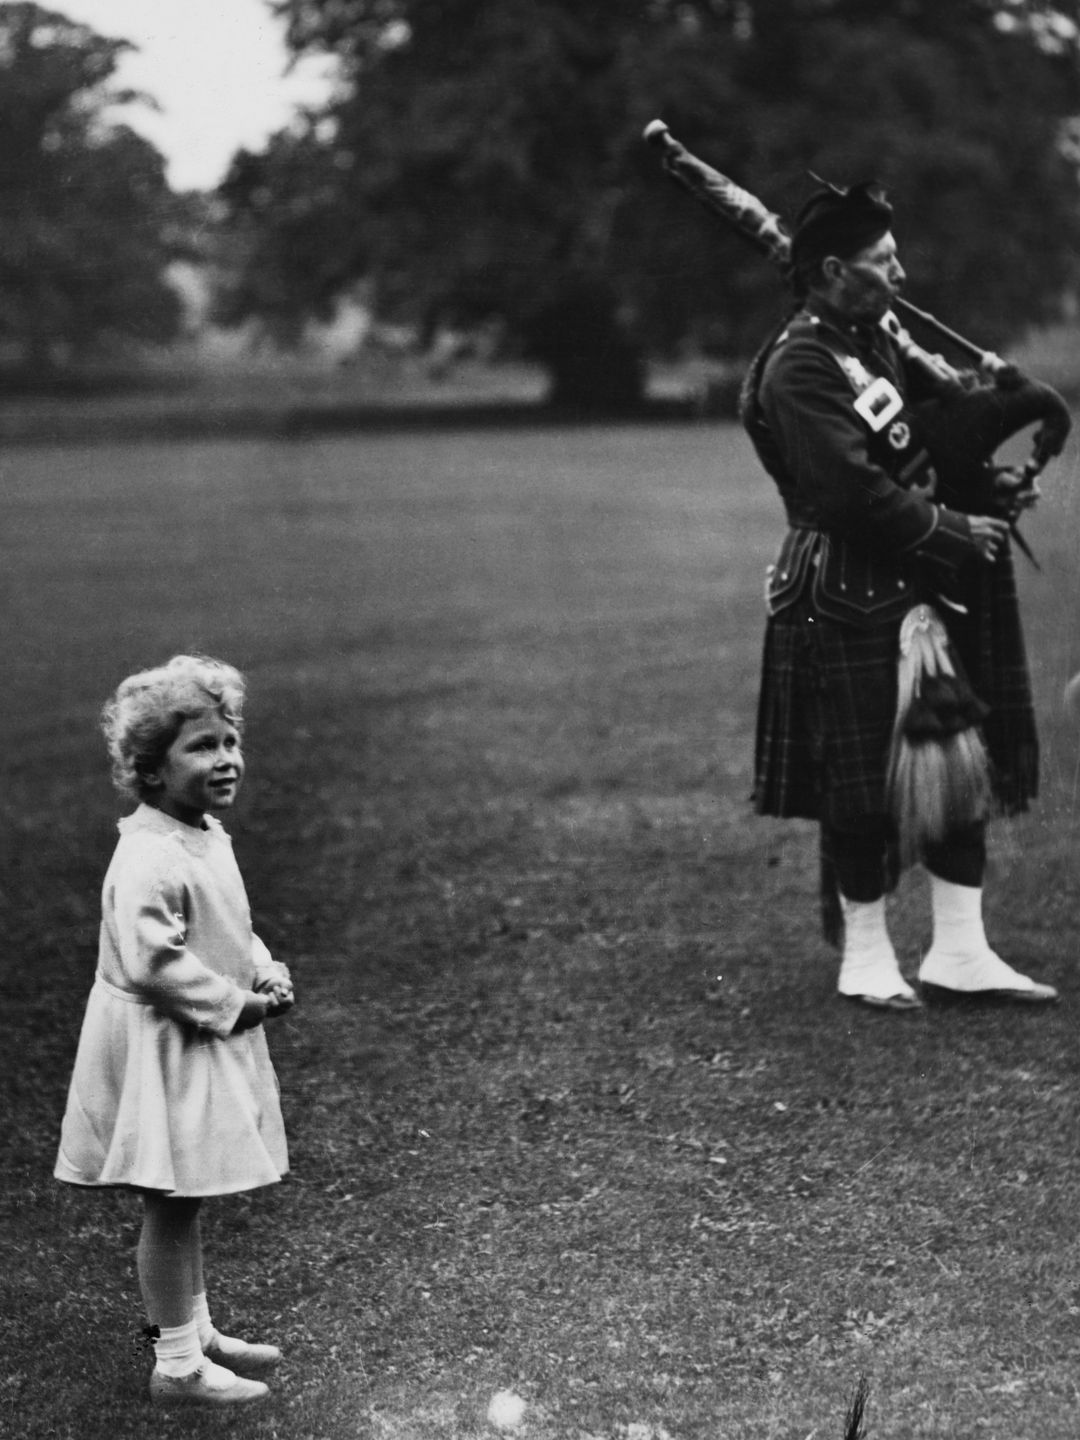 A young Queen Elizabeth next to a bagpipe player